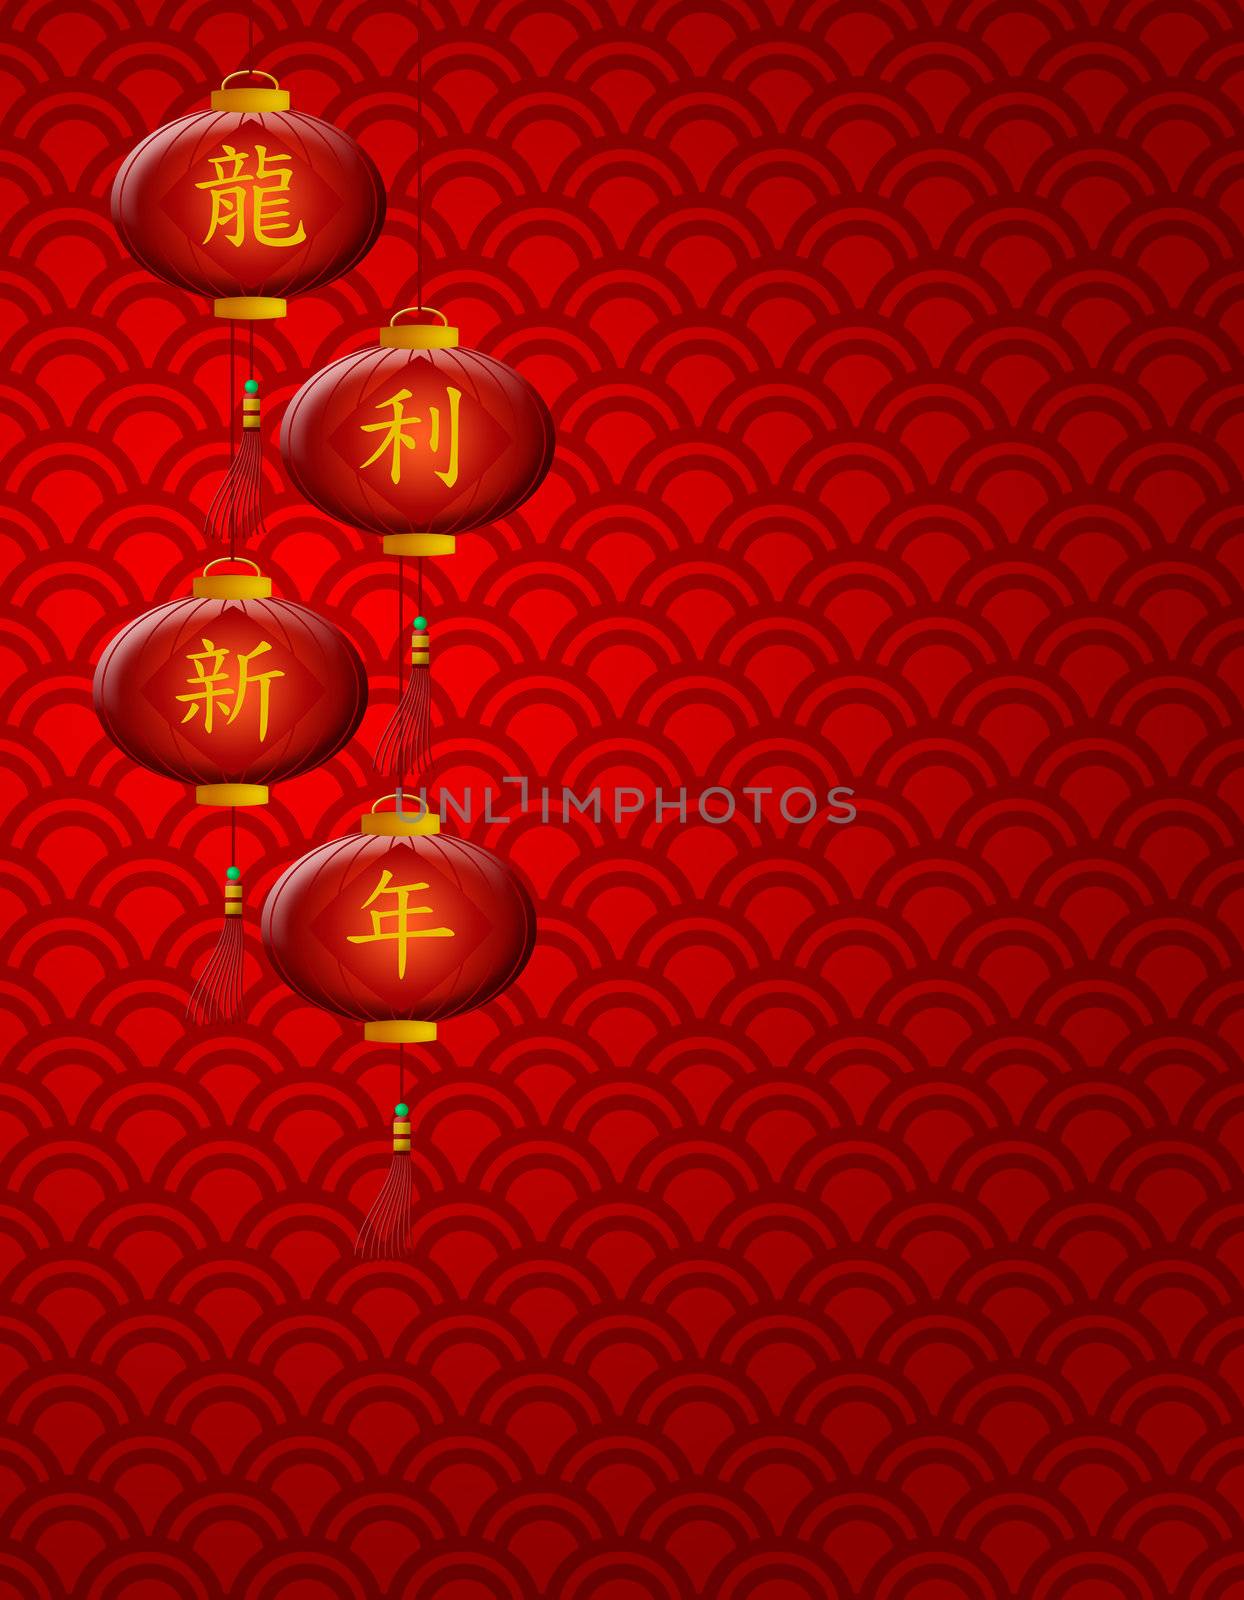 Chinese Lanterns with Text Wishing Good Luck in Year of the Dragons on Red Scales Background Illustration